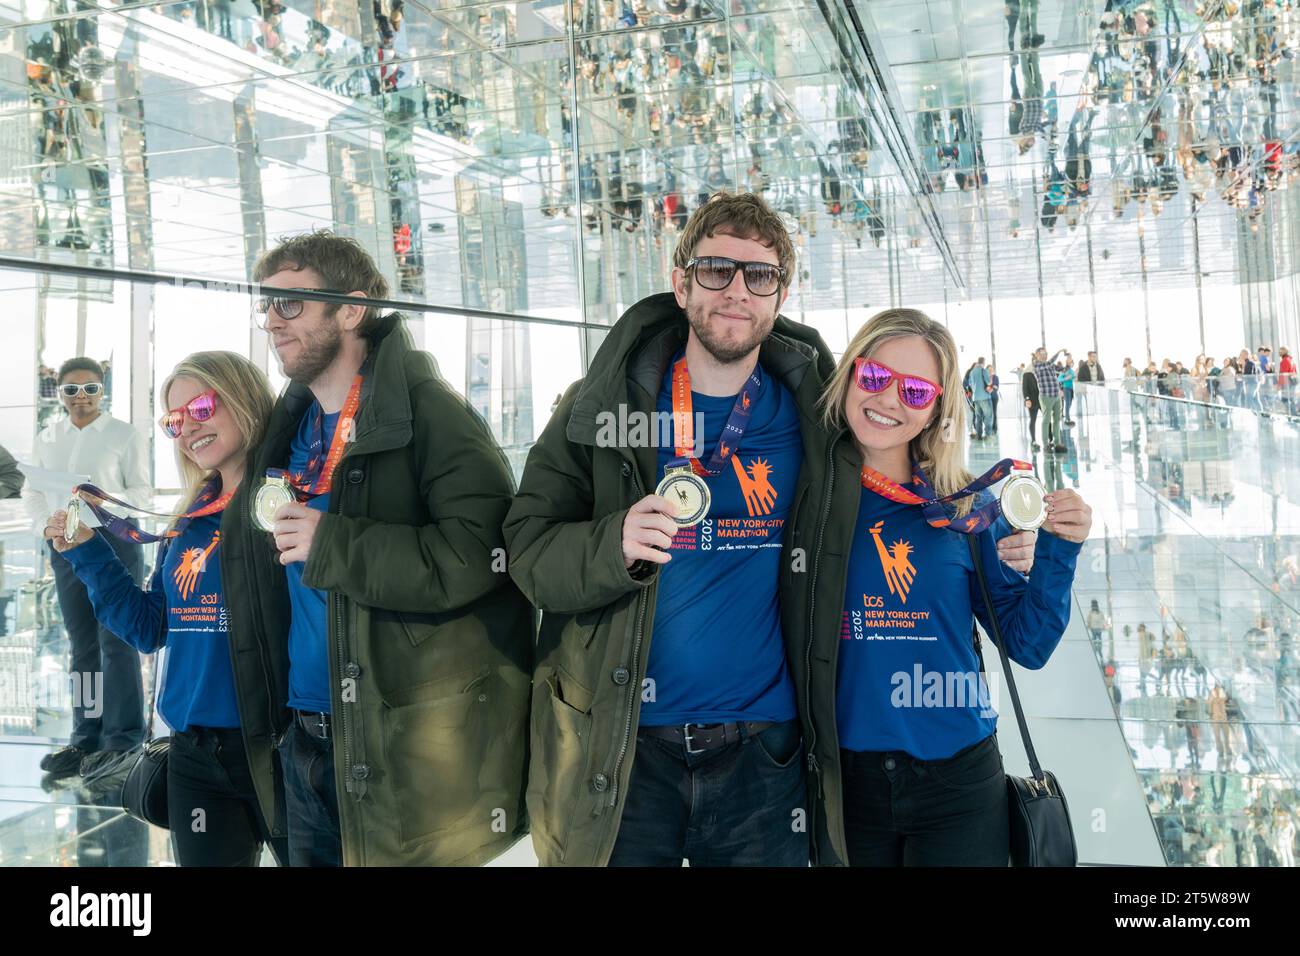 Runners Participated In 2023 Tcs New York City Marathon Seen Visiting Summit One Vanderbuilt Observation Deck In New York On November 6 2023 2T5W89W 